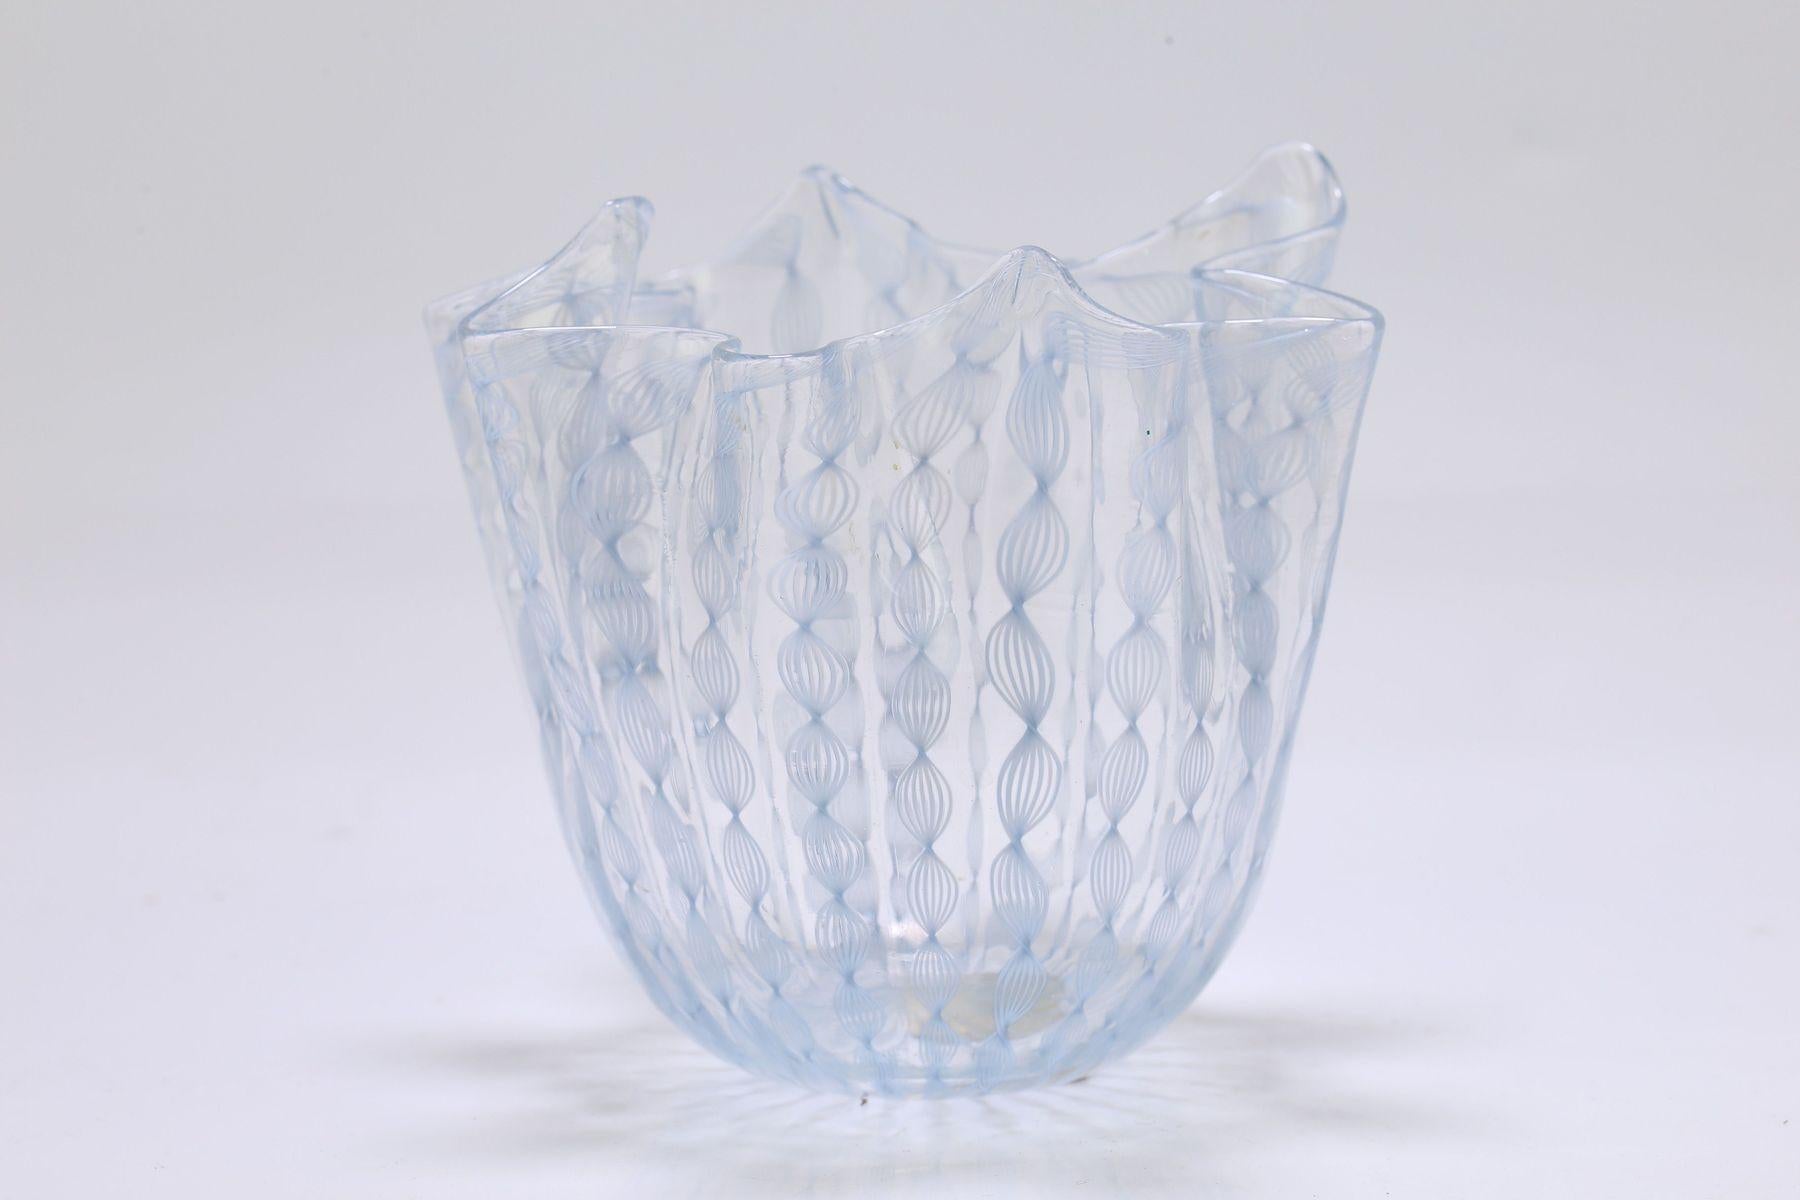 Handkerchief bowl/vase designed by Fulvio Bianconi for Venini, Murano. This fazzoletto bowl features zanfirico glass with lattimo white netted vertical cane and light blue ribbons, showcasing a technique dating back to the 16th century in Murano.